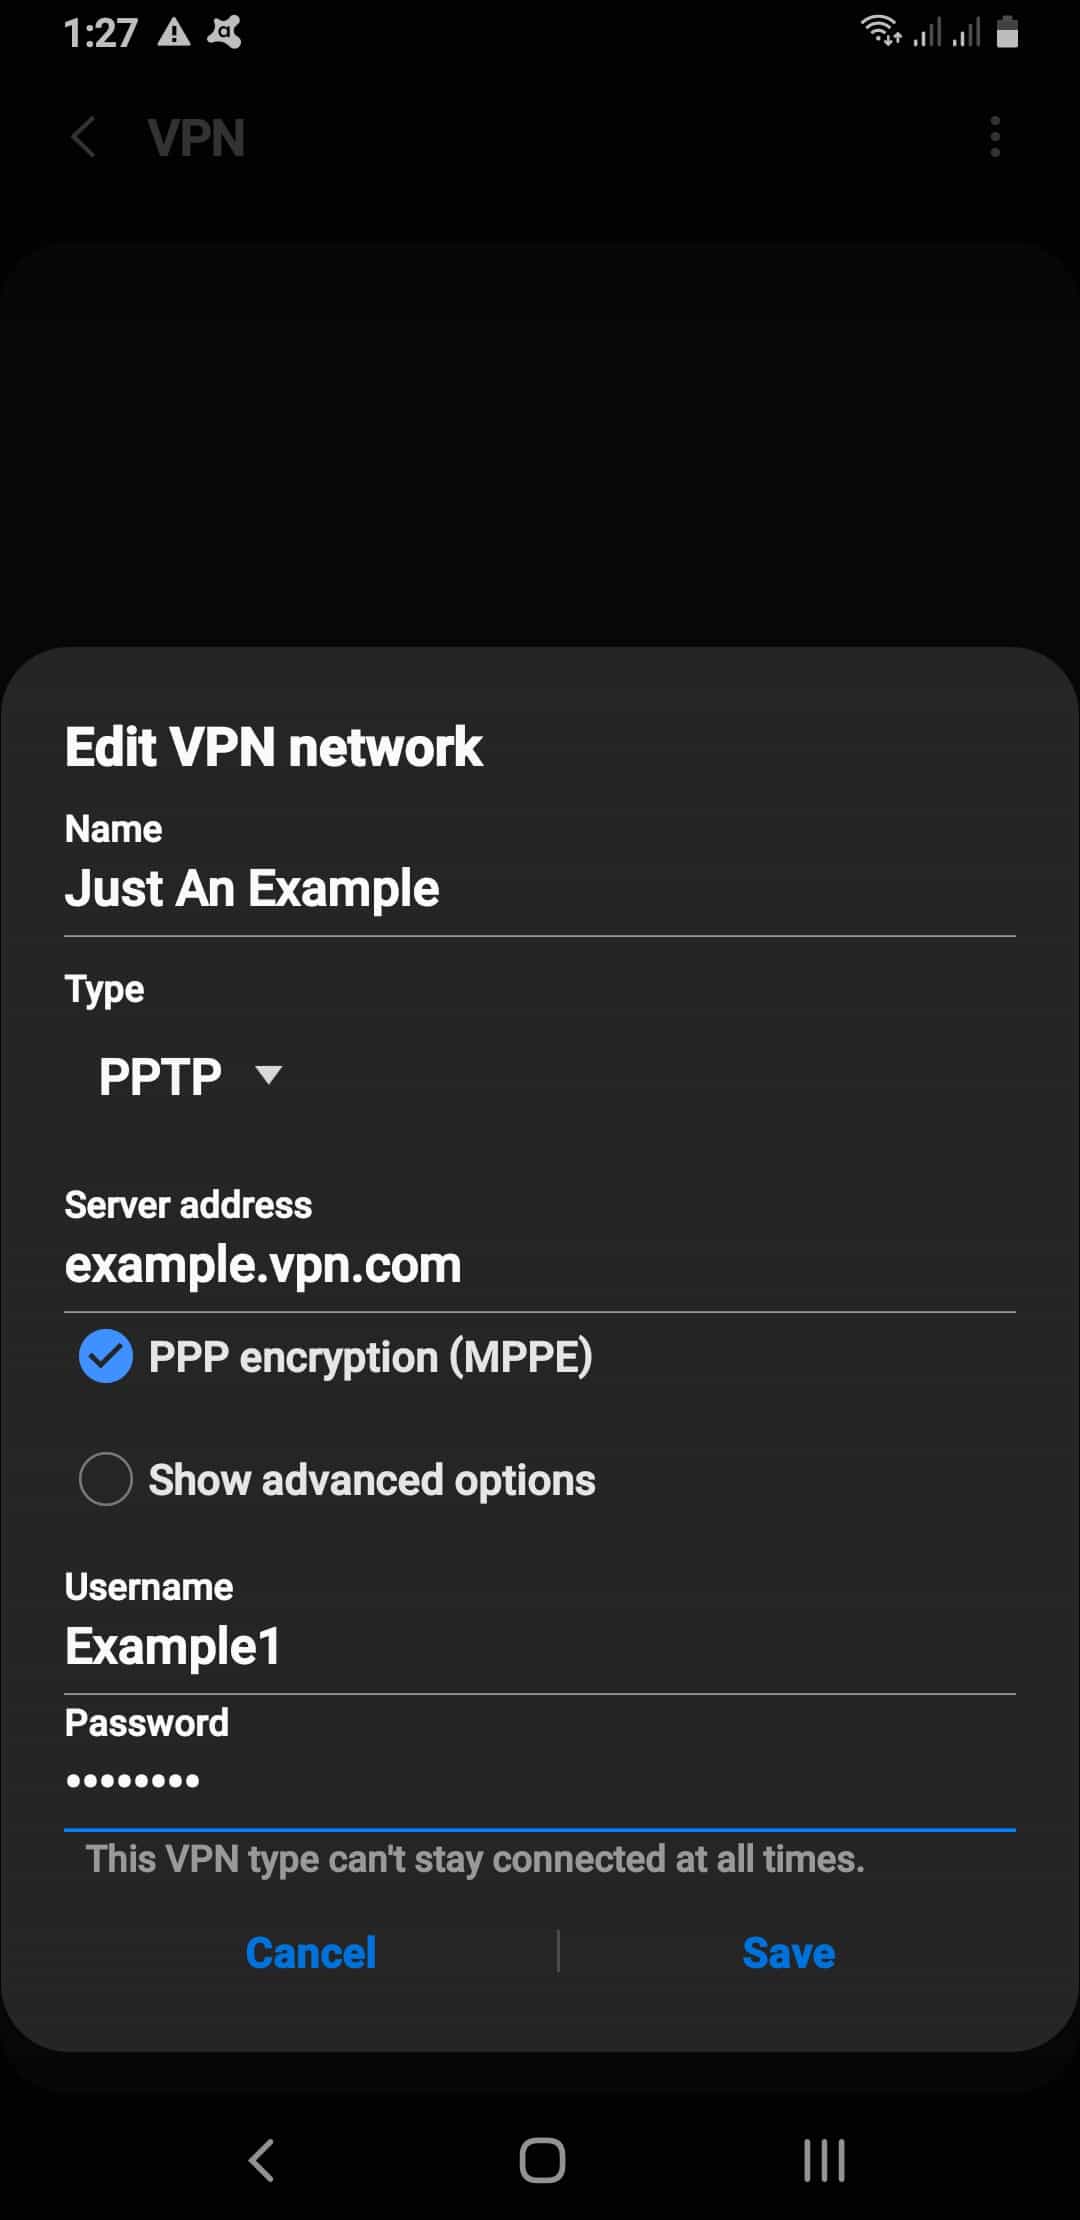 How do I add a VPN to my network?